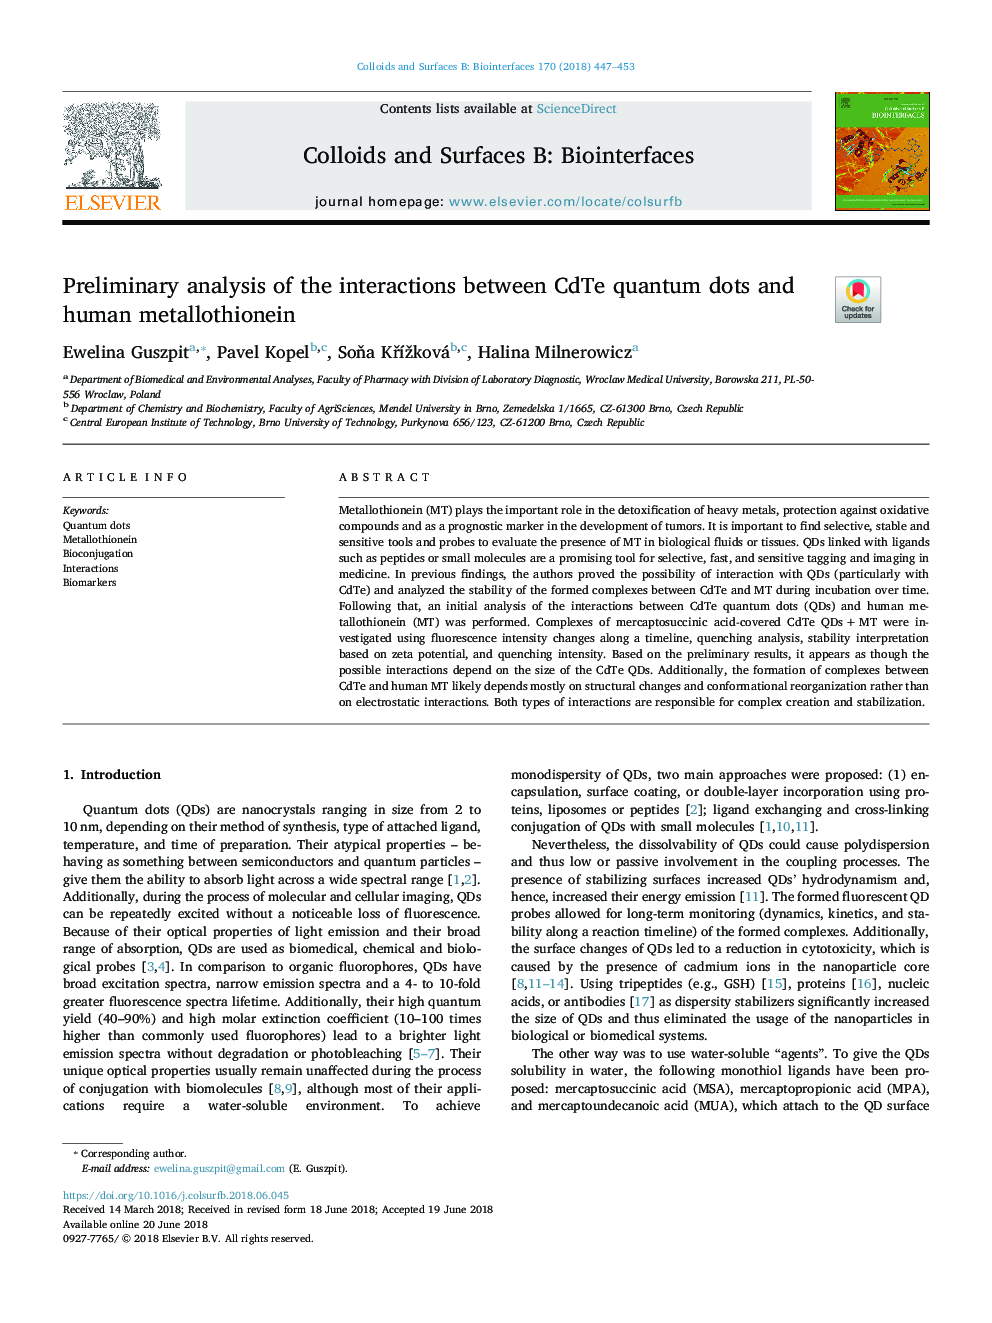 Preliminary analysis of the interactions between CdTe quantum dots and human metallothionein